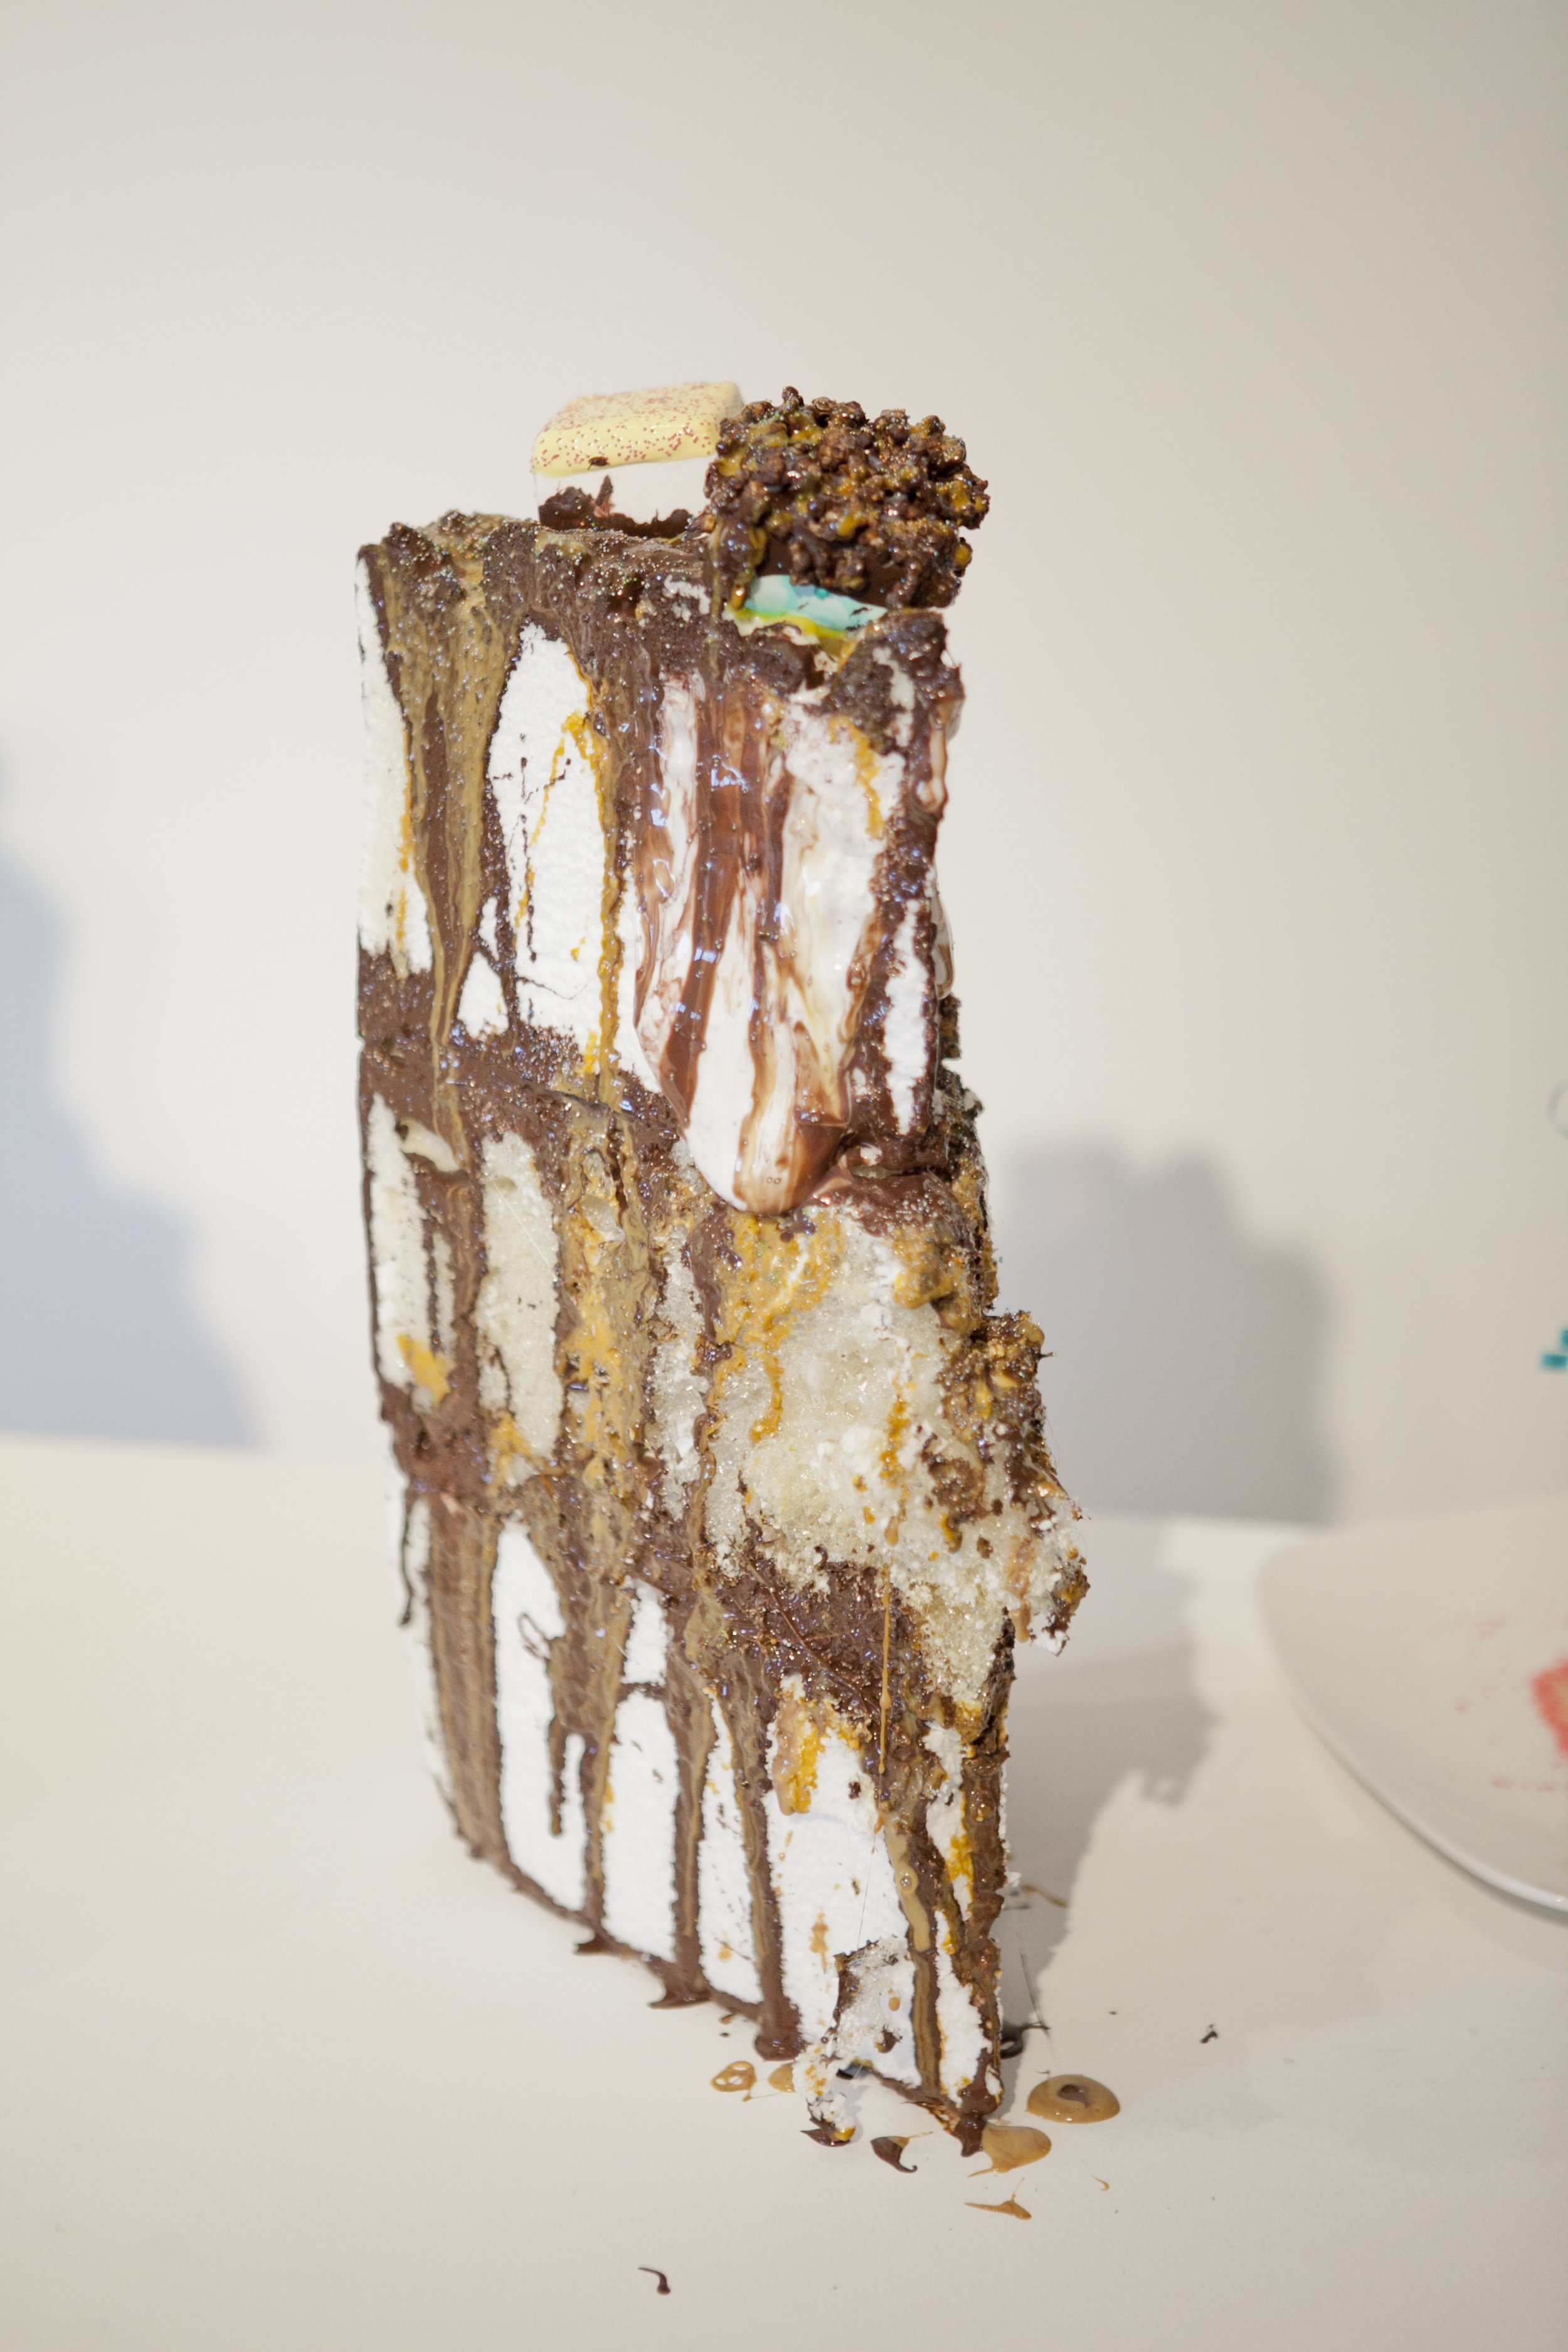   Just One S'more Piece... I'm on a Diet (Detail)   Mixed Media  2011  Photo:  Jon Shaft     